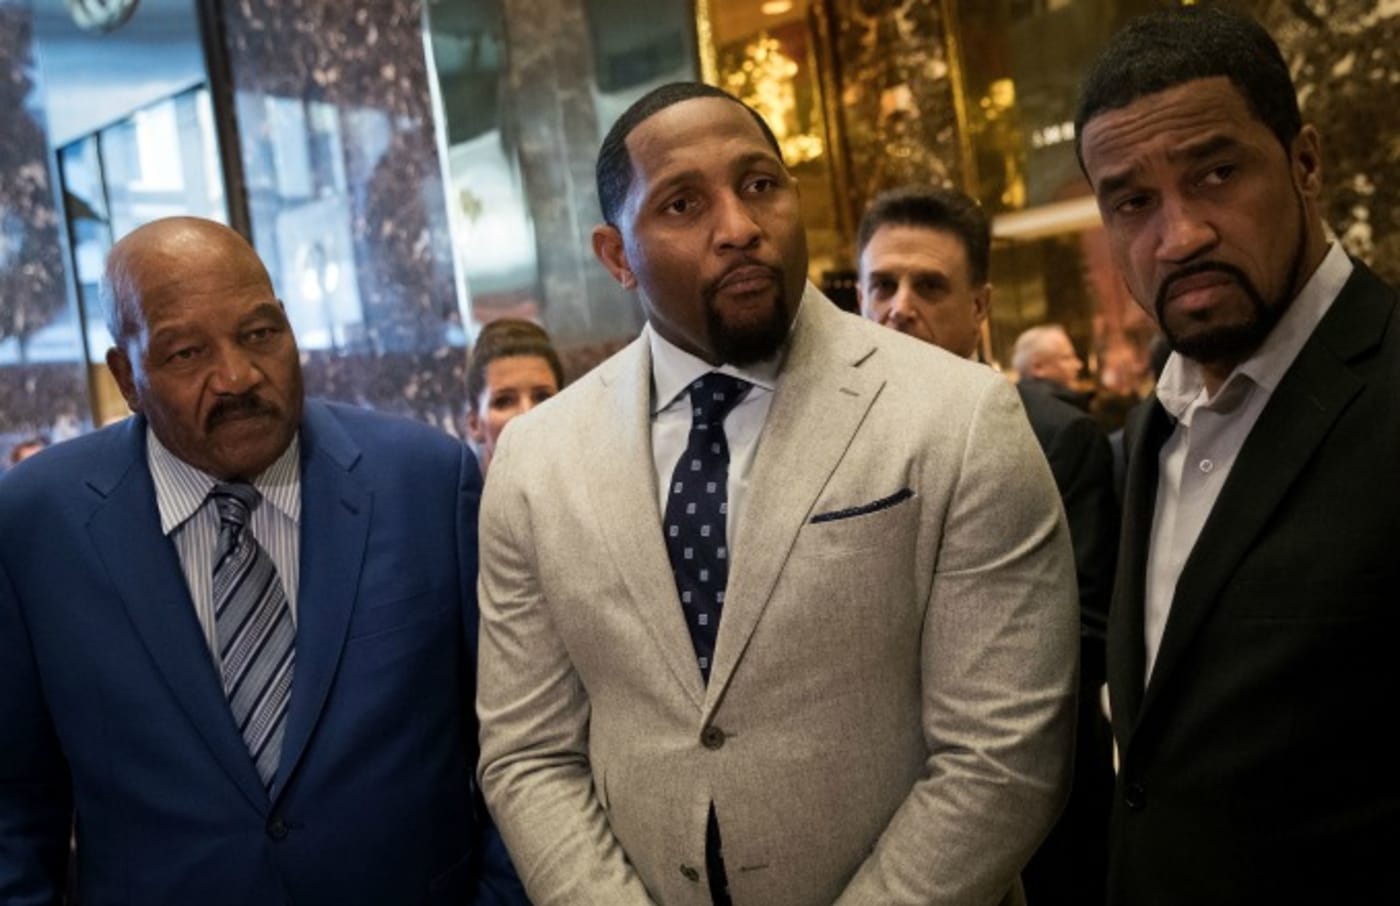 Ray Lewis prepares to meet with Donald Trump.